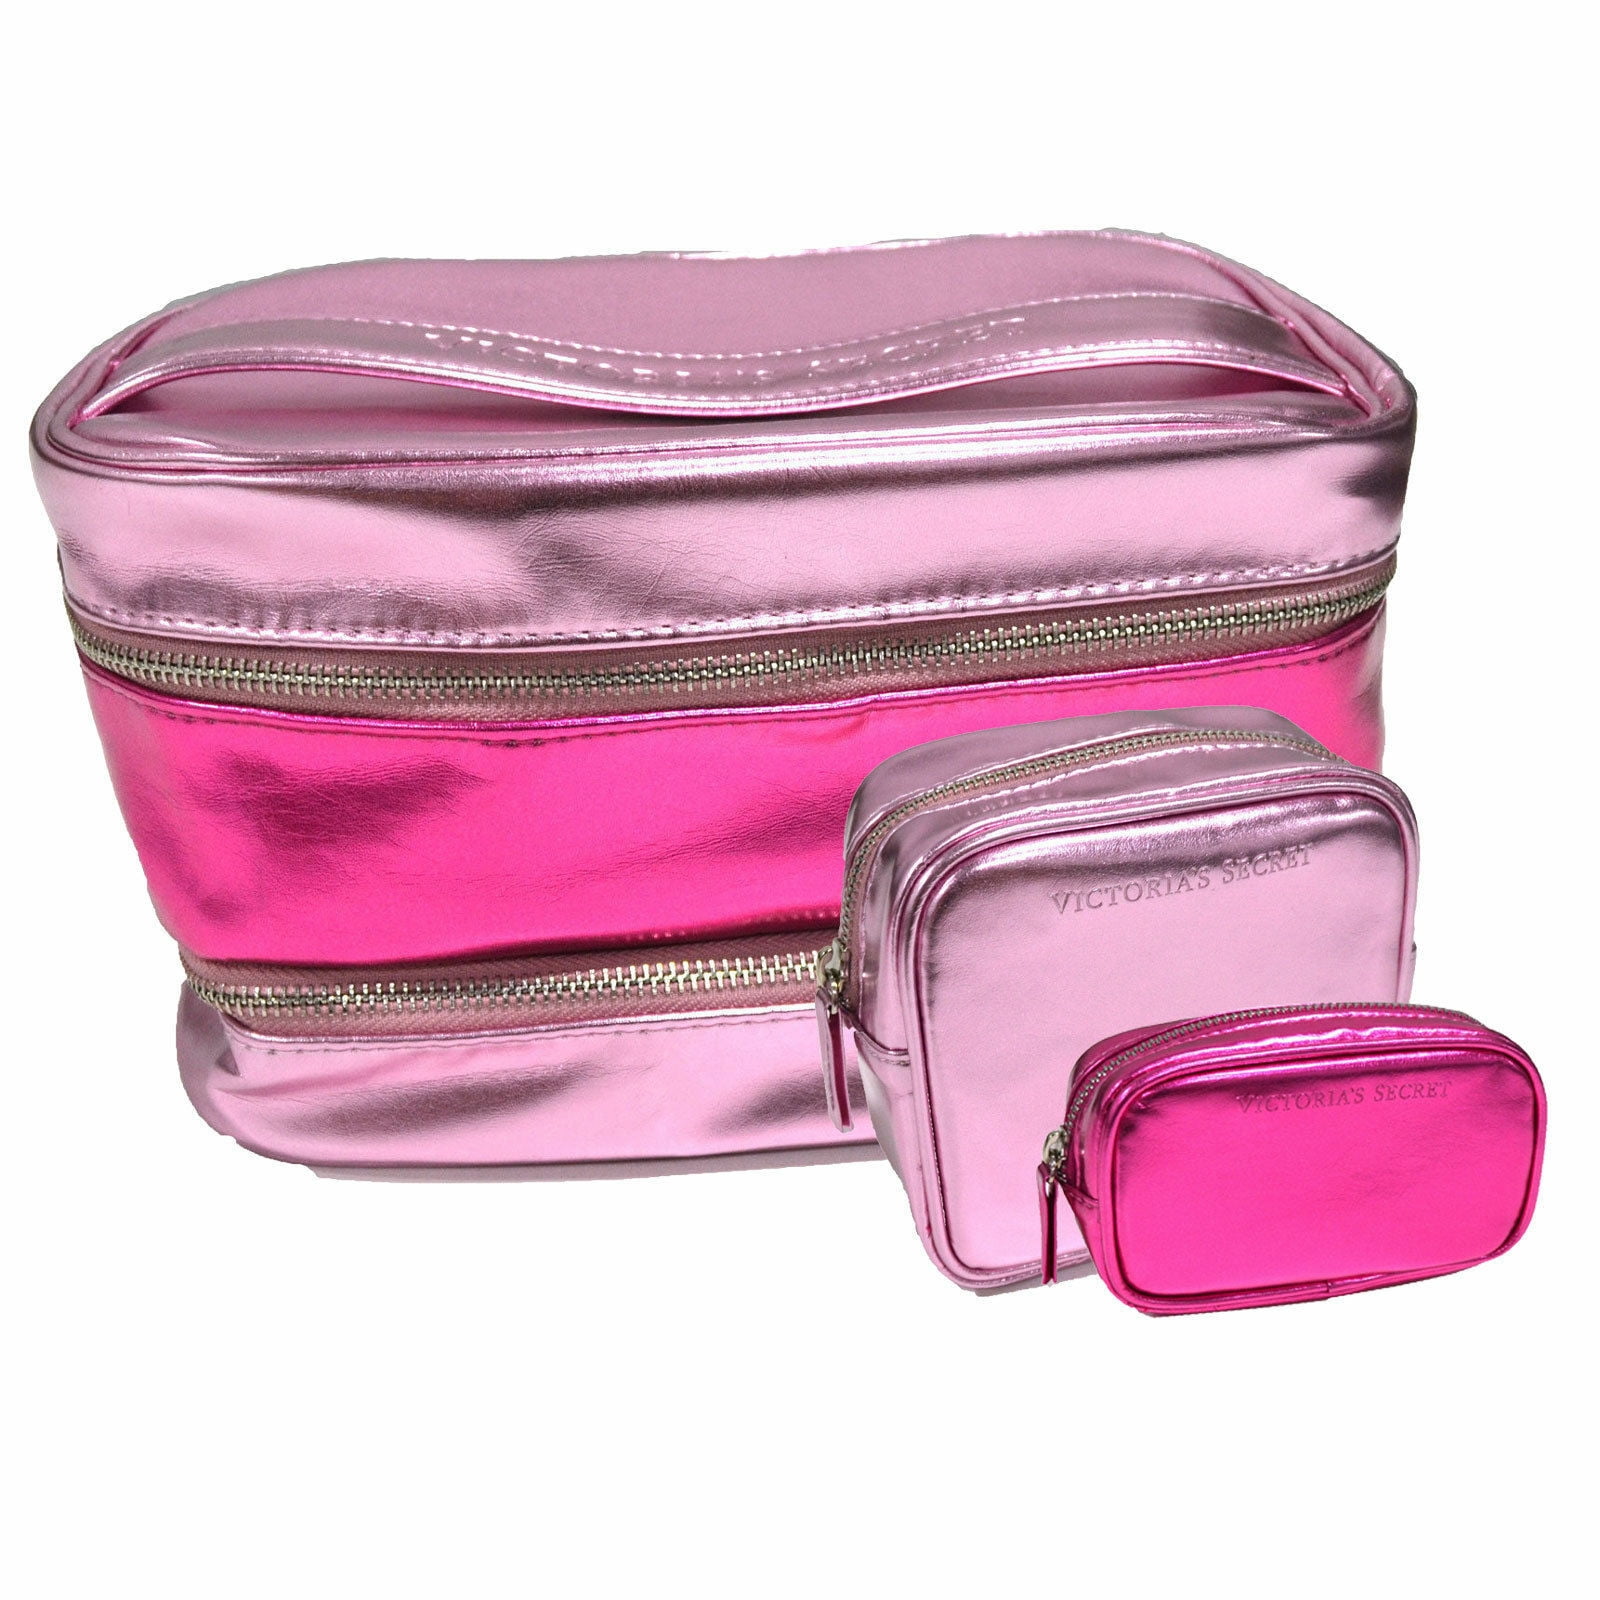 Leotrusting Matt Pink Aluminum Foil Window Zip Lock Bags Christmas Gifts  Pouches Pink Jewelry Nail Beauty Bracelets Package Bags 